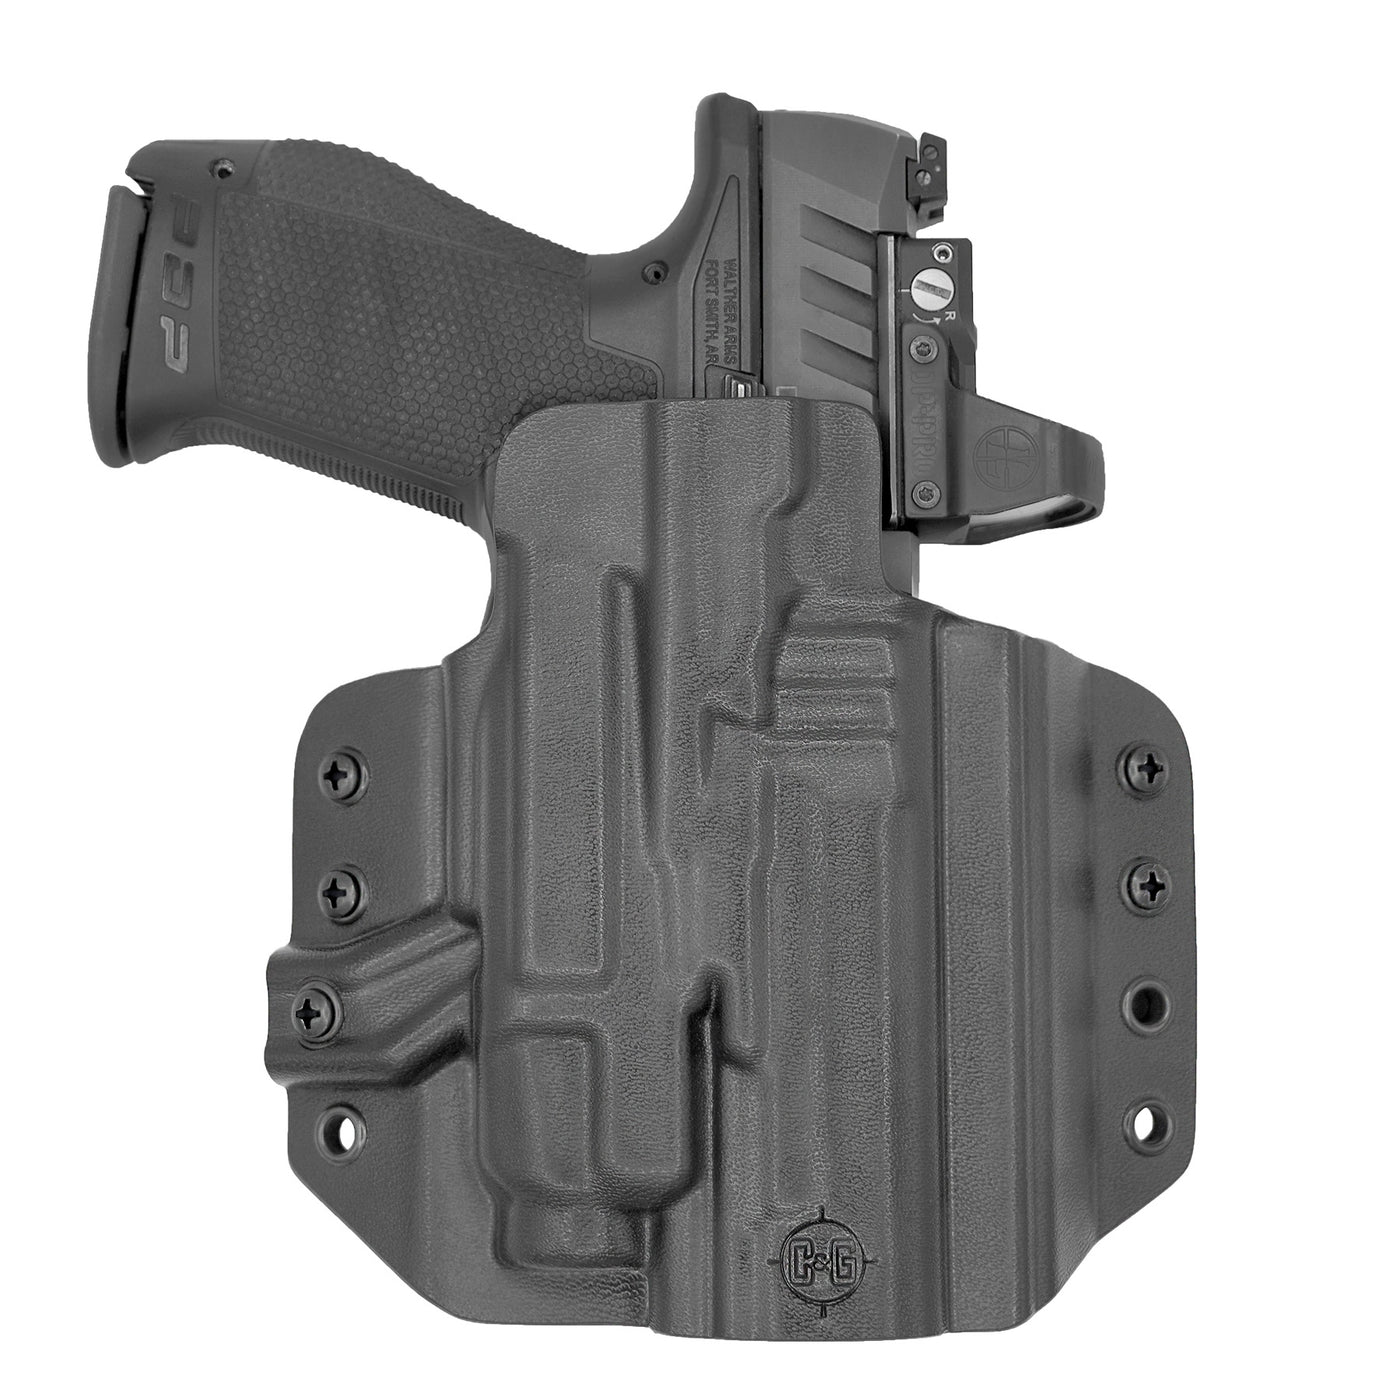 C&G Holsters quickship OWB Tactical FN 509/T Streamlight TLR7/a in holstered position